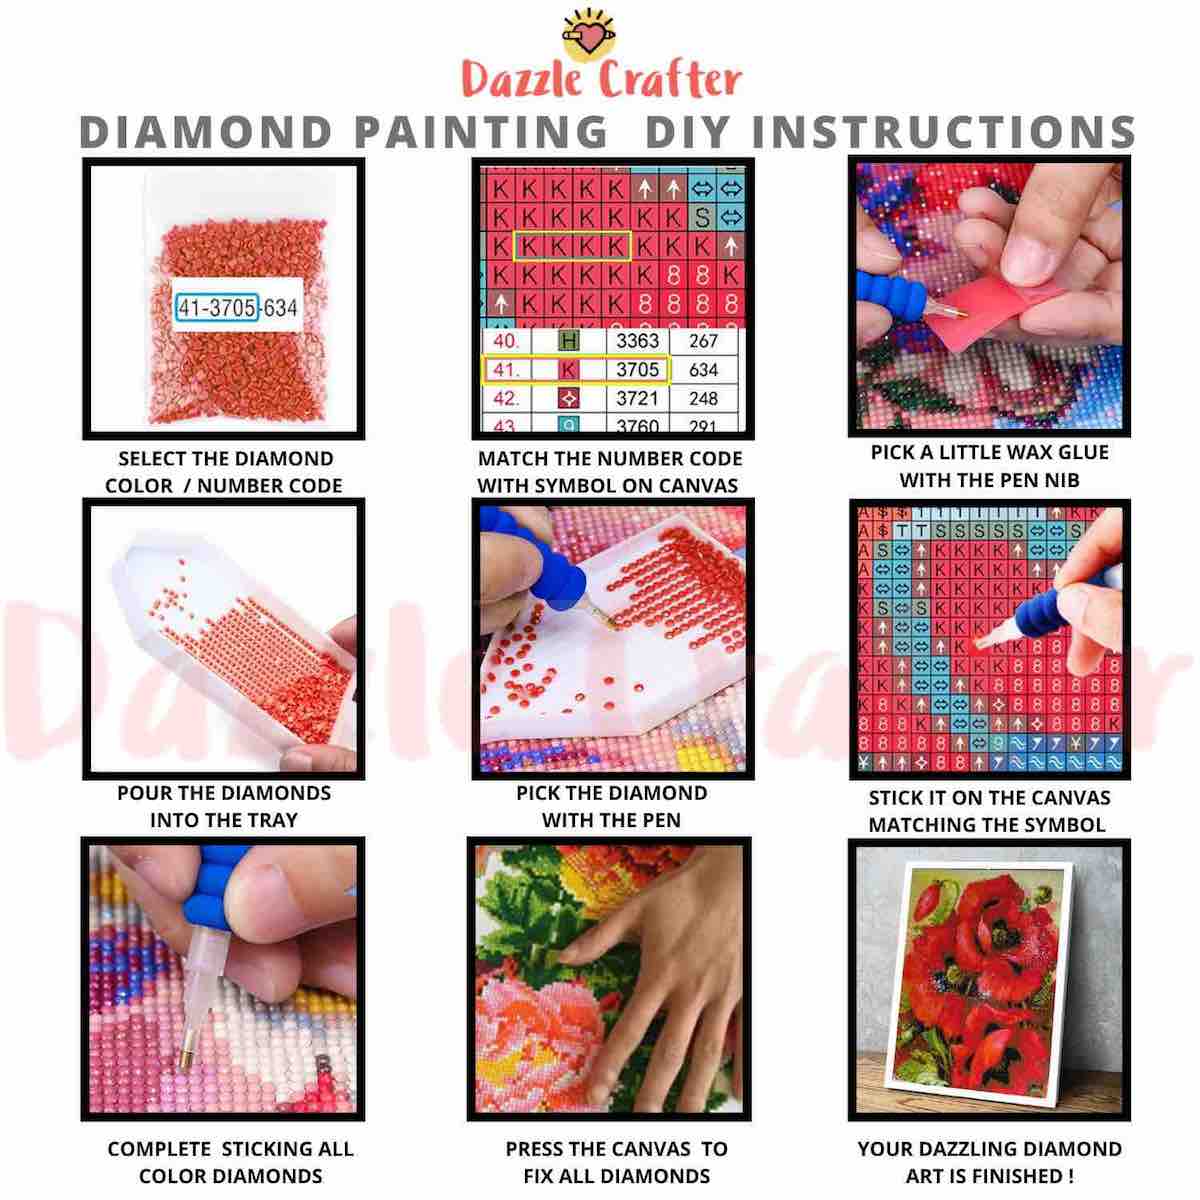 Purple Queen Diamond Painting Kit - DAZZLE CRAFTER